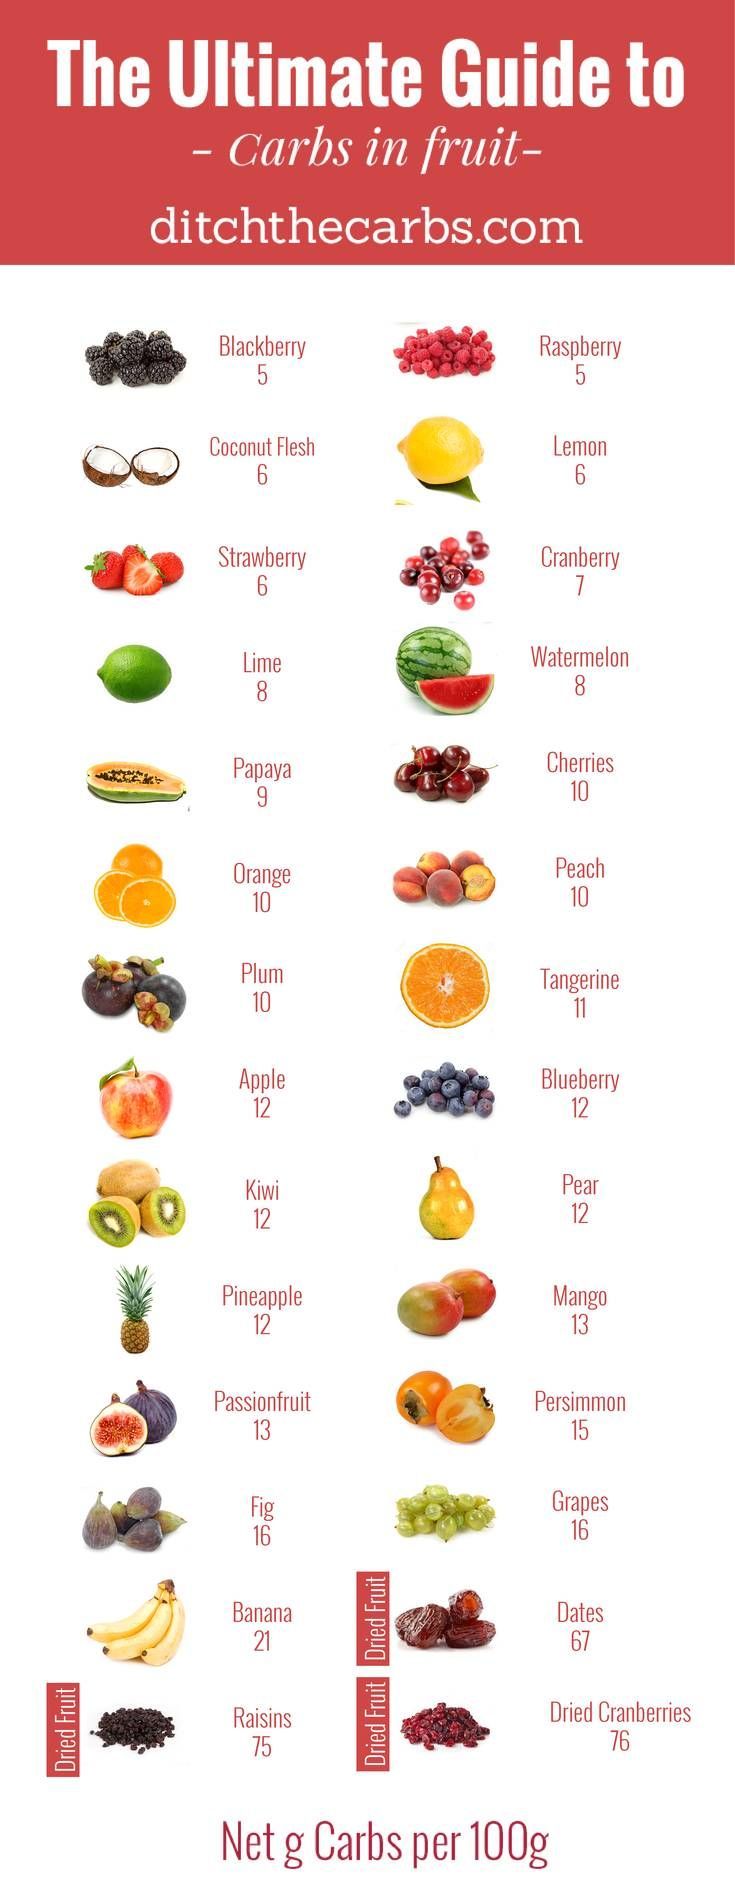 You have to read this “Ultimate guide to carbs in fruit”. You will see which to enjoy and which to avoid in an easy photo grid. |